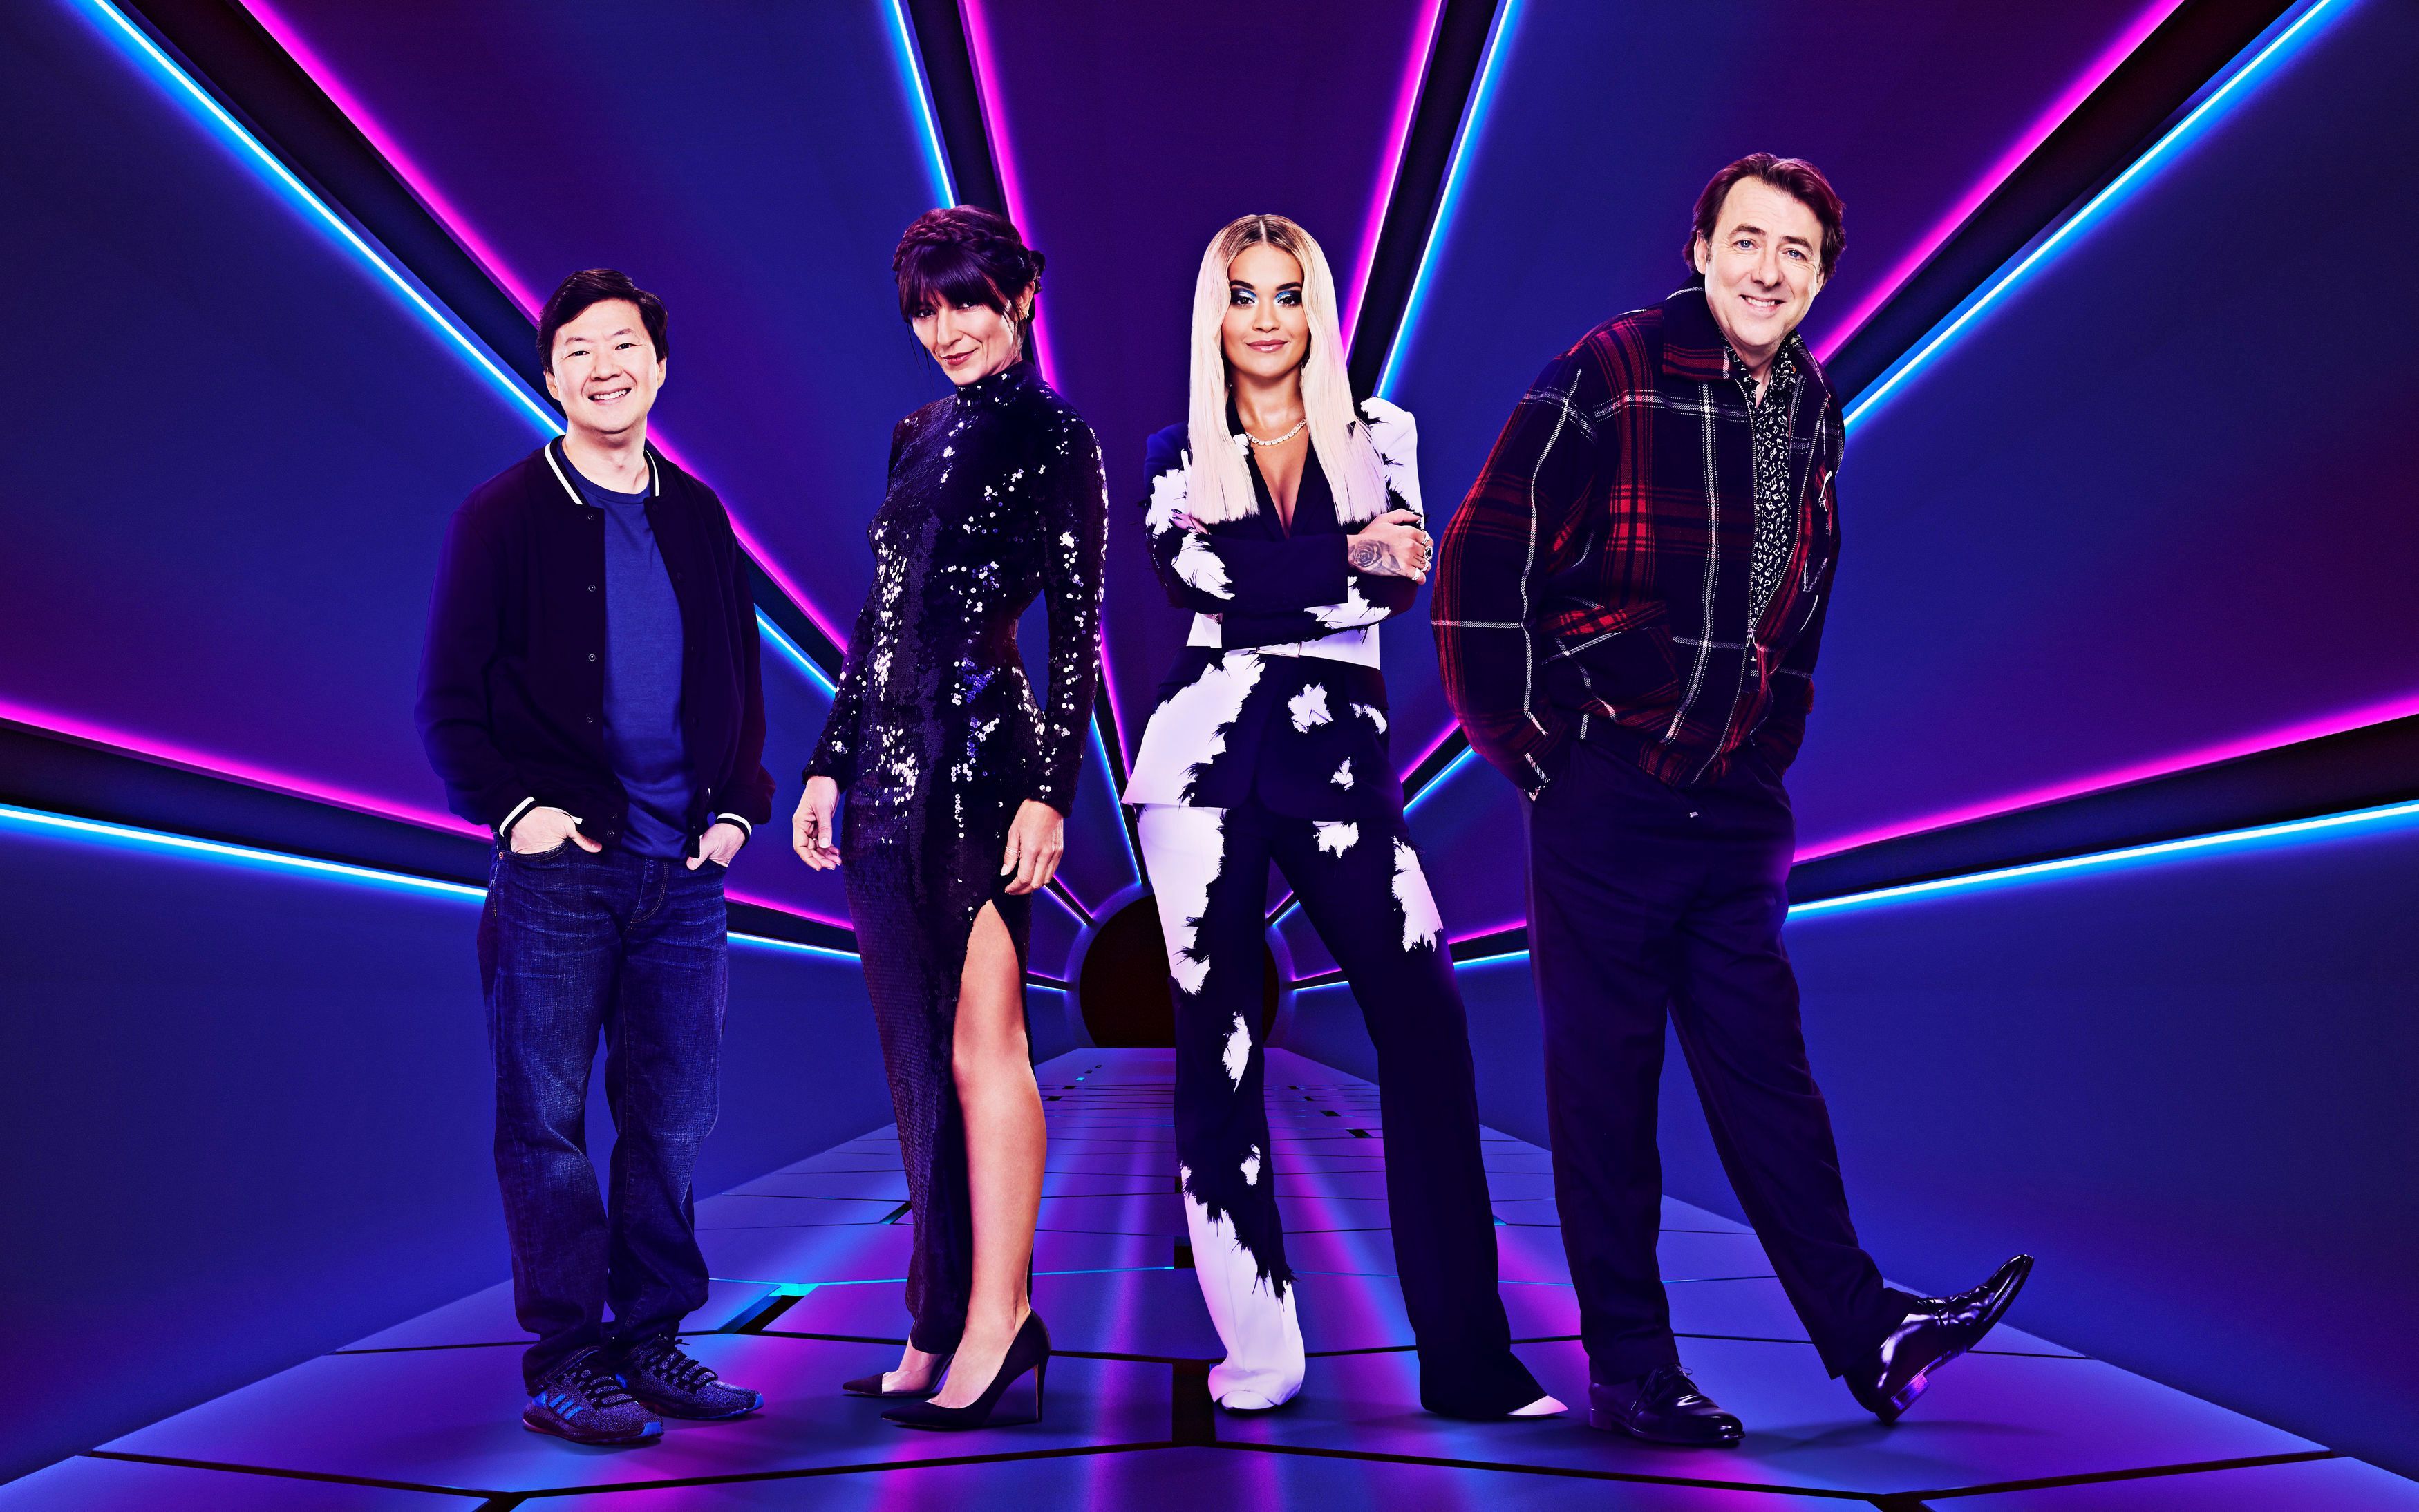 The Masked Singer judges Rita Ora, Ken Jeong, Jonathan Ross and Davina McCall will ALL return for another series